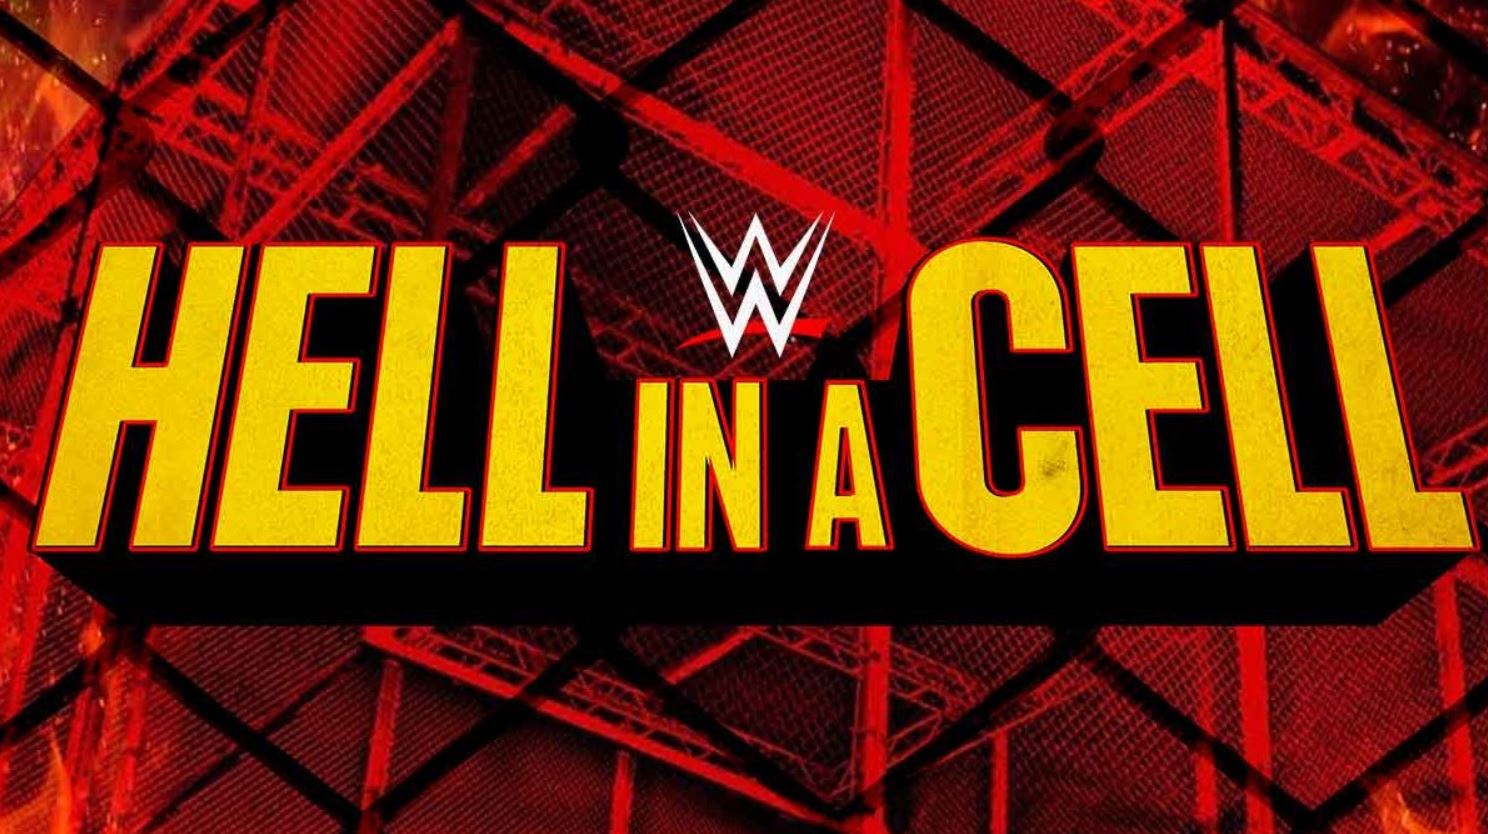 hell in a cell